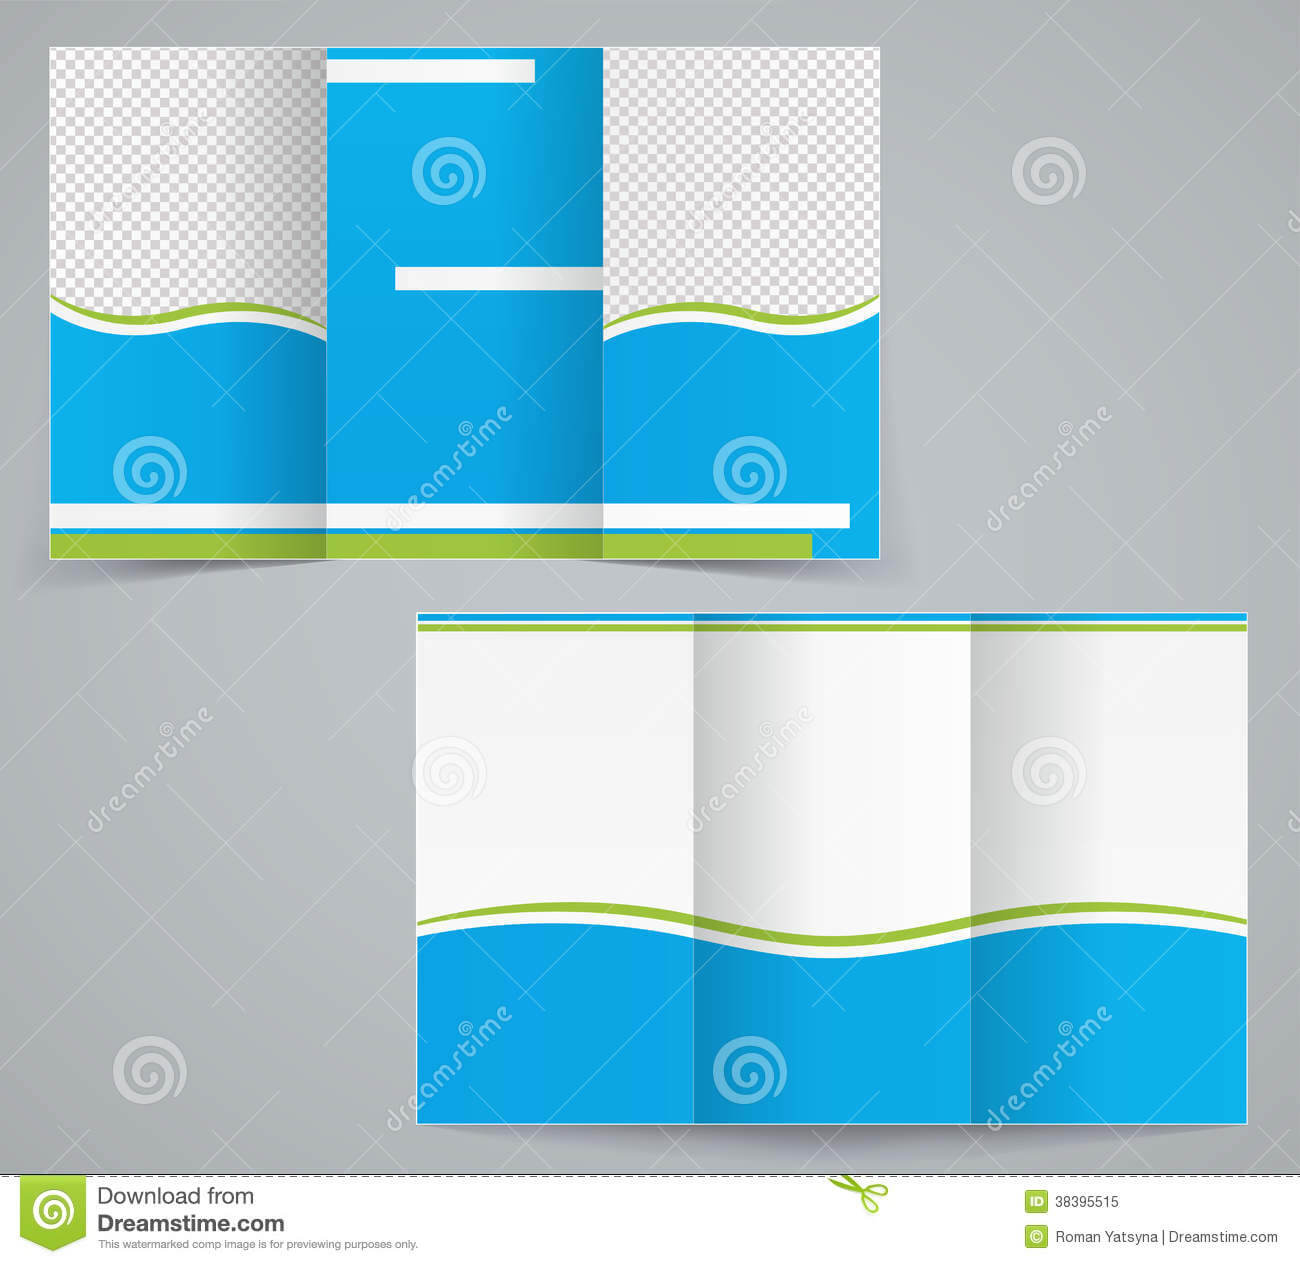 Tri Fold Business Brochure Template, Blue Design Stock For 6 Sided Brochure Template